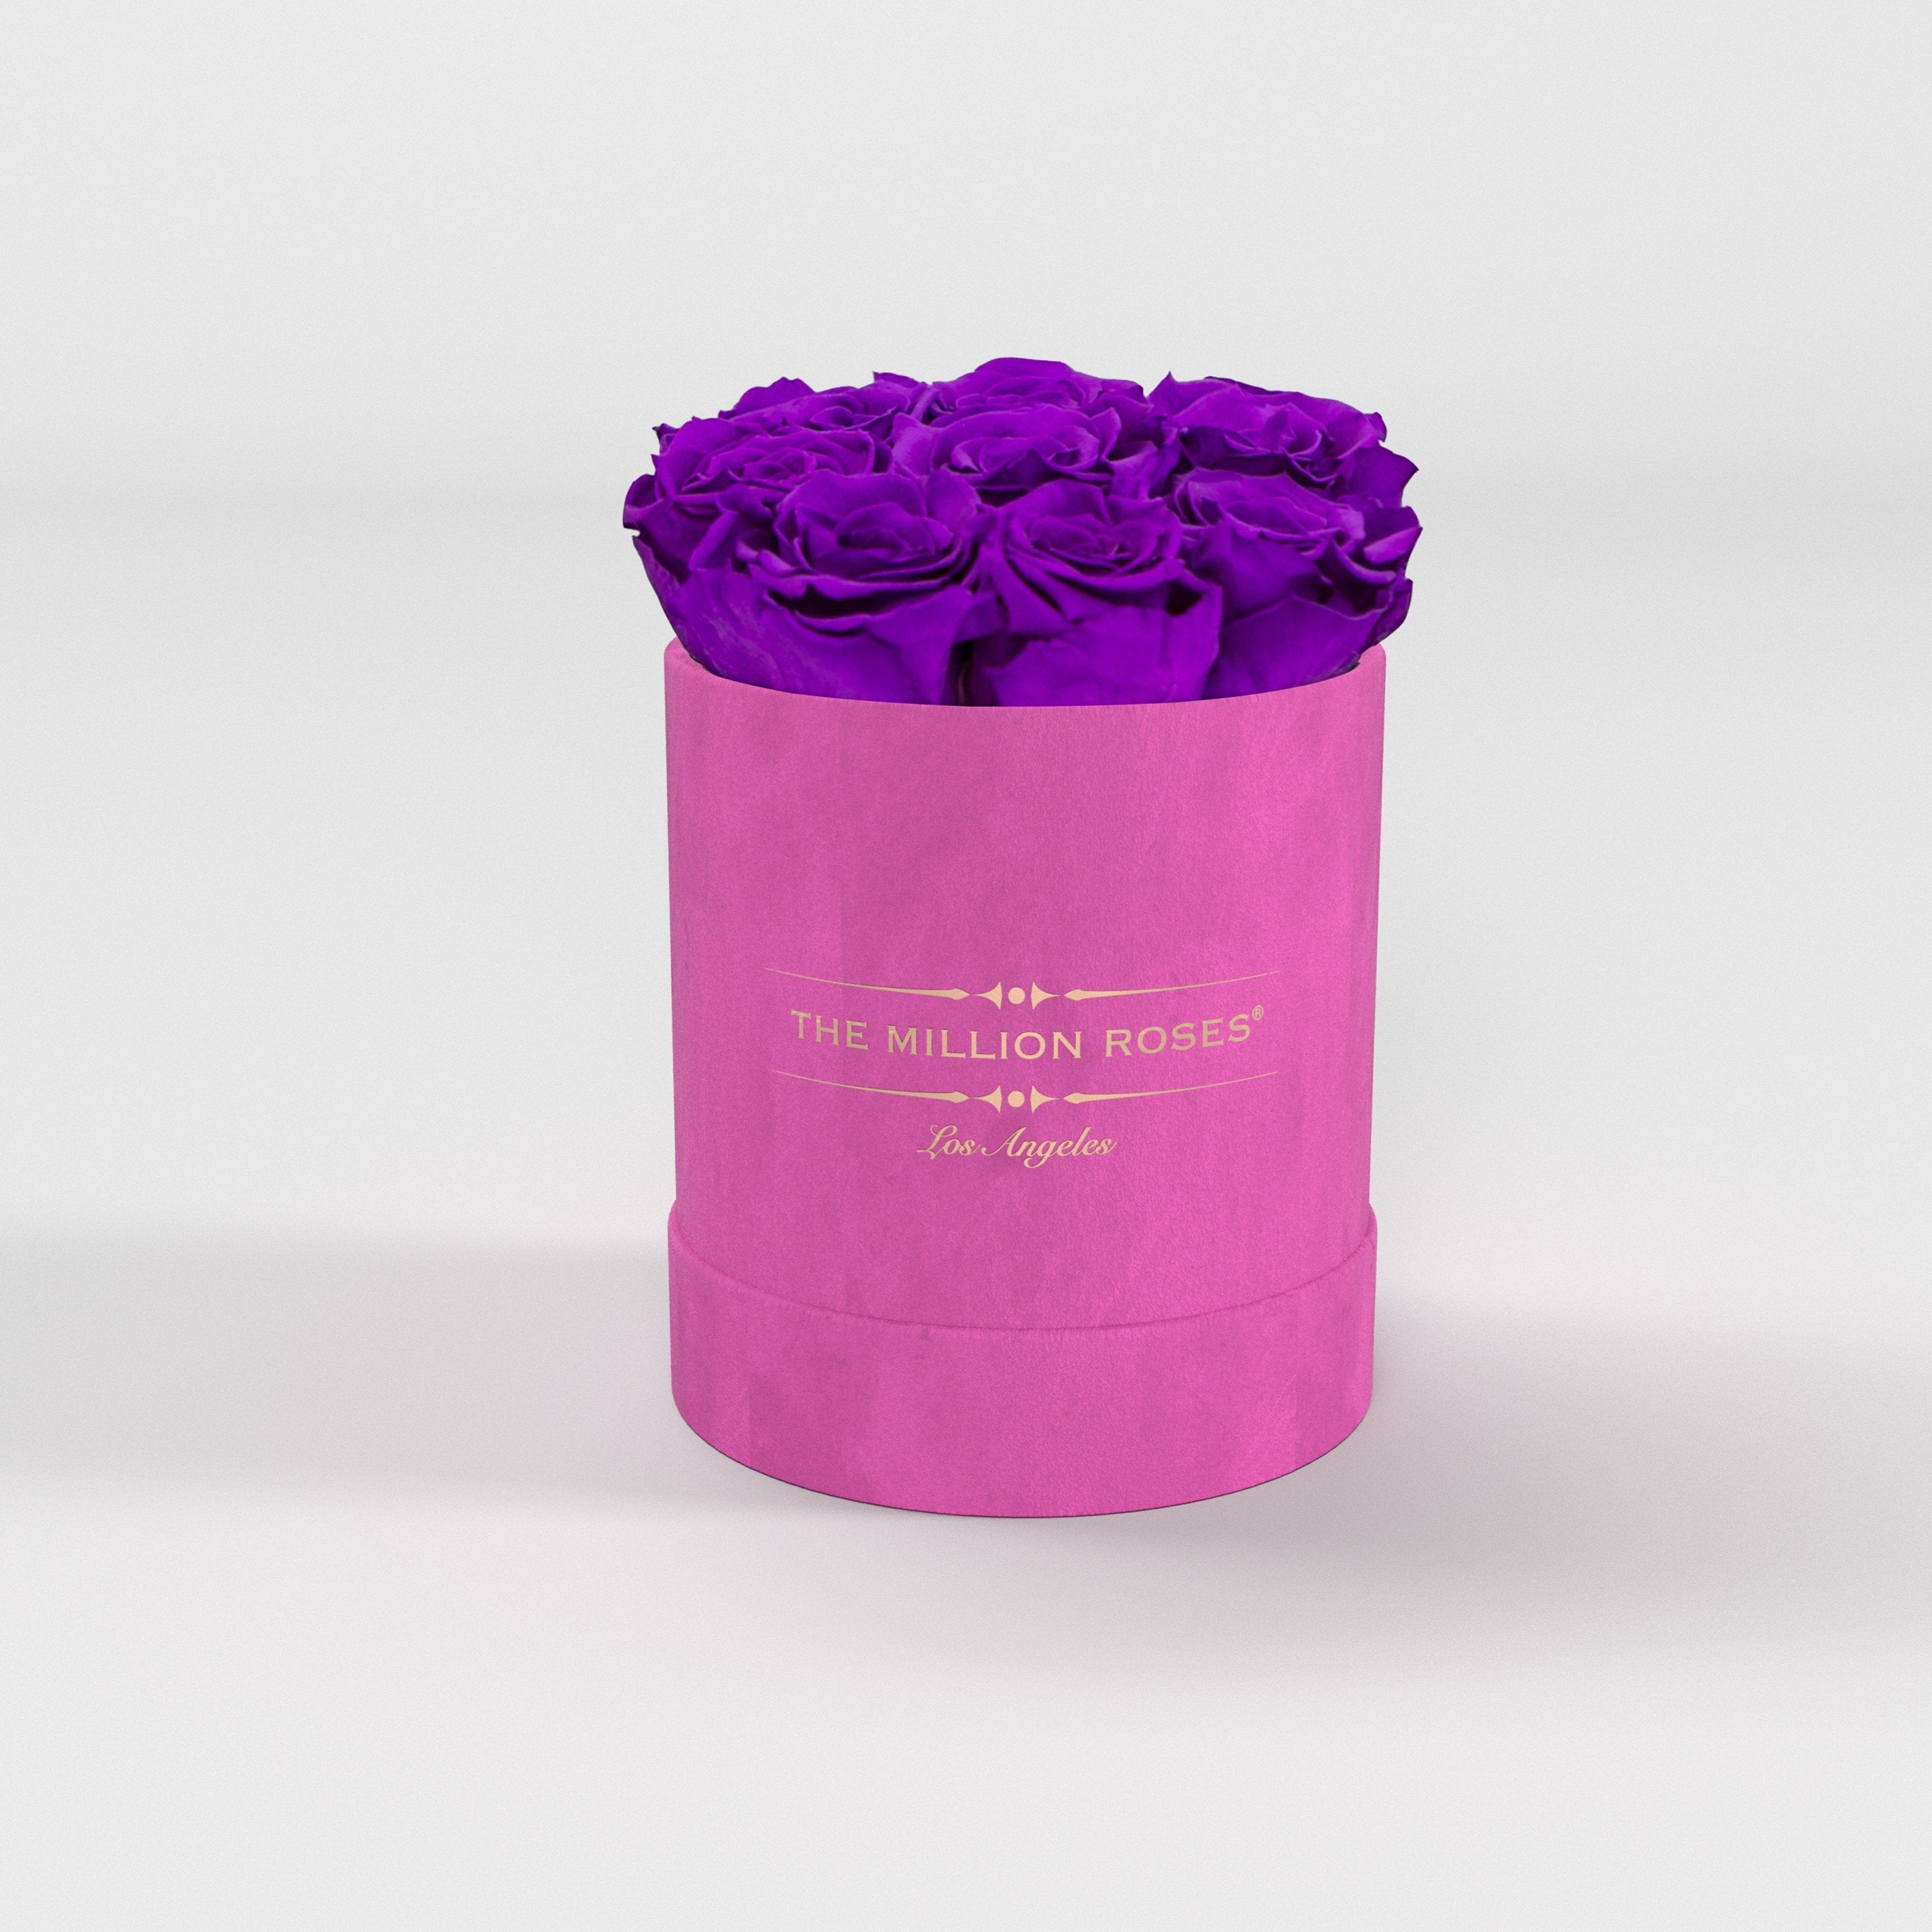 ( LA ) Hot Pink - Suede - Basic Box with Bright Purple Roses Kit - the million roses